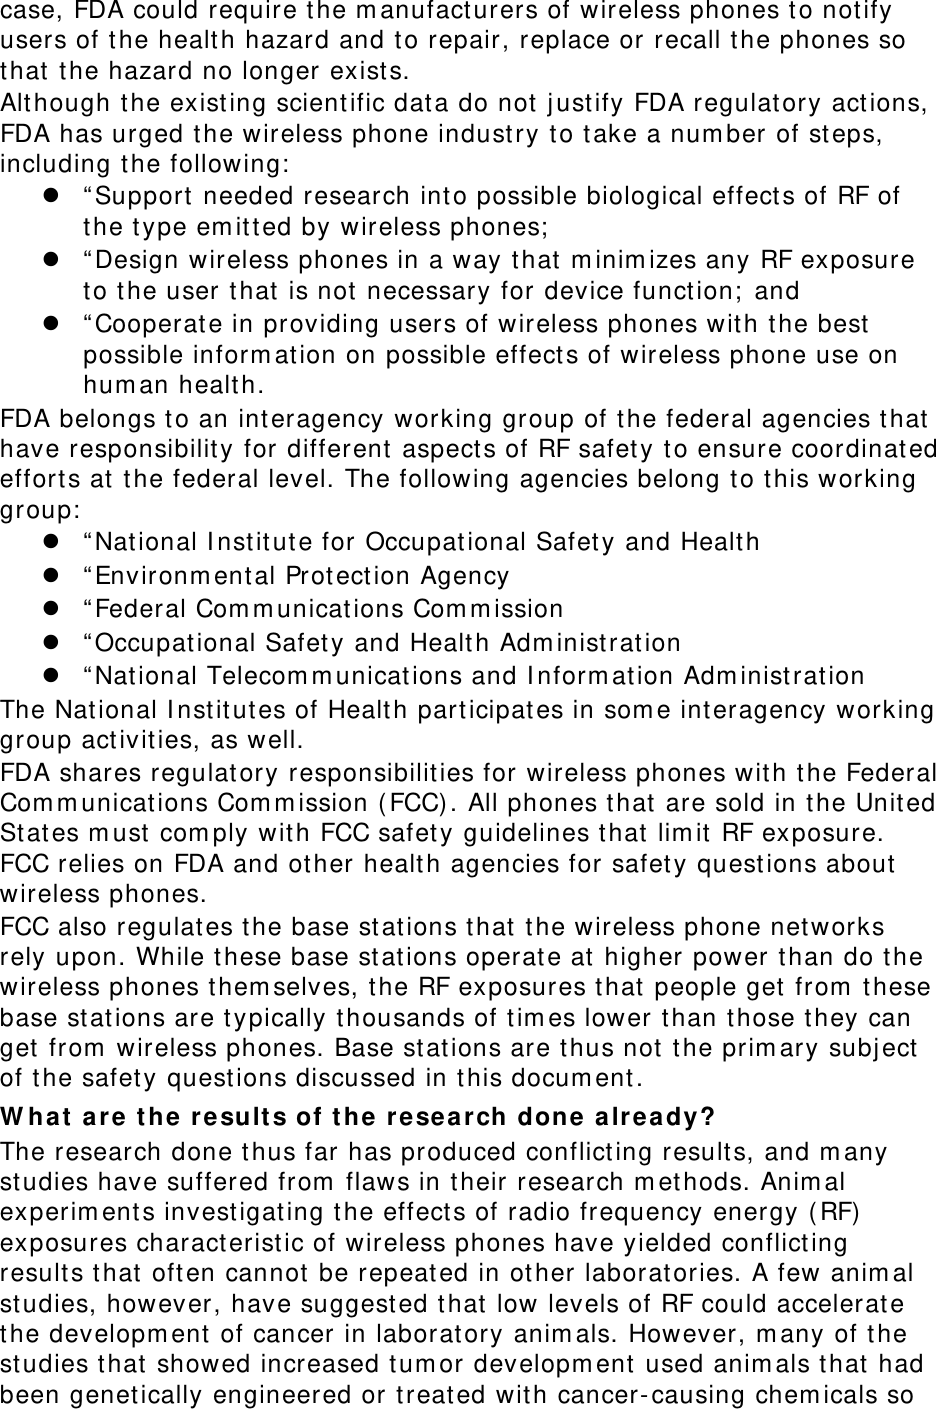 case, FDA could require the m anufact urers of wireless phones t o not ify users of t he healt h hazard and t o repair, replace or recall the phones so that t he hazard no longer exists. Alt hough the exist ing scient ific dat a do not j ust ify FDA regulat ory act ions, FDA has urged t he wireless phone indust ry t o t ake a num ber of st eps, including t he following:  z “ Support needed research into possible biological effect s of RF of the t ype em it ted by wireless phones;  z “ Design wireless phones in a way t hat  m inim izes any RF exposure to t he user t hat  is not  necessary for device funct ion;  and z “ Cooperat e in providing users of wireless phones wit h the best  possible inform at ion on possible effect s of wireless phone use on hum an healt h. FDA belongs t o an int eragency working group of t he federal agencies t hat  have responsibilit y for different aspect s of RF safet y t o ensure coordinat ed effort s at  the federal level. The following agencies belong t o t his working group:  z “ National I nst itut e for Occupational Safet y and Healt h z “ Environm ent al Prot ect ion Agency z “ Federal Com m unicat ions Com m ission z “ Occupat ional Safet y and Healt h Adm inistrat ion z “ National Telecom m unicat ions and I nform ation Adm inist rat ion The Nat ional I nstit ut es of Health part icipat es in som e interagency working group activit ies, as well. FDA shares regulat ory responsibilities for wireless phones wit h t he Federal Com m unicat ions Com m ission ( FCC). All phones t hat  are sold in t he United St ates m ust  com ply wit h FCC safet y guidelines t hat  lim it  RF exposure. FCC relies on FDA and ot her health agencies for safet y questions about  wireless phones. FCC also regulat es the base st at ions t hat  the wireless phone net works rely upon. While these base st ations operate at  higher power t han do t he wireless phones t hem selves, t he RF exposures t hat  people get from  t hese base st at ions are t ypically t housands of t im es lower t han t hose t hey can get  from  wireless phones. Base stat ions are t hus not  t he prim ary subj ect  of t he safet y questions discussed in t his docum ent. W h a t  are t he result s of t he  r e sea r ch done alrea dy? The research done t hus far has produced conflict ing result s, and m any studies have suffered from  flaws in t heir research m ethods. Anim al experim ents investigating t he effect s of radio frequency energy ( RF) exposures charact erist ic of wireless phones have yielded conflicting results t hat  often cannot be repeat ed in other laboratories. A few anim al studies, however, have suggest ed t hat  low levels of RF could accelerat e the developm ent  of cancer in laboratory anim als. However, m any of t he studies t hat  showed increased t um or developm ent  used anim als t hat  had been genet ically engineered or t reated with cancer- causing chem icals so 